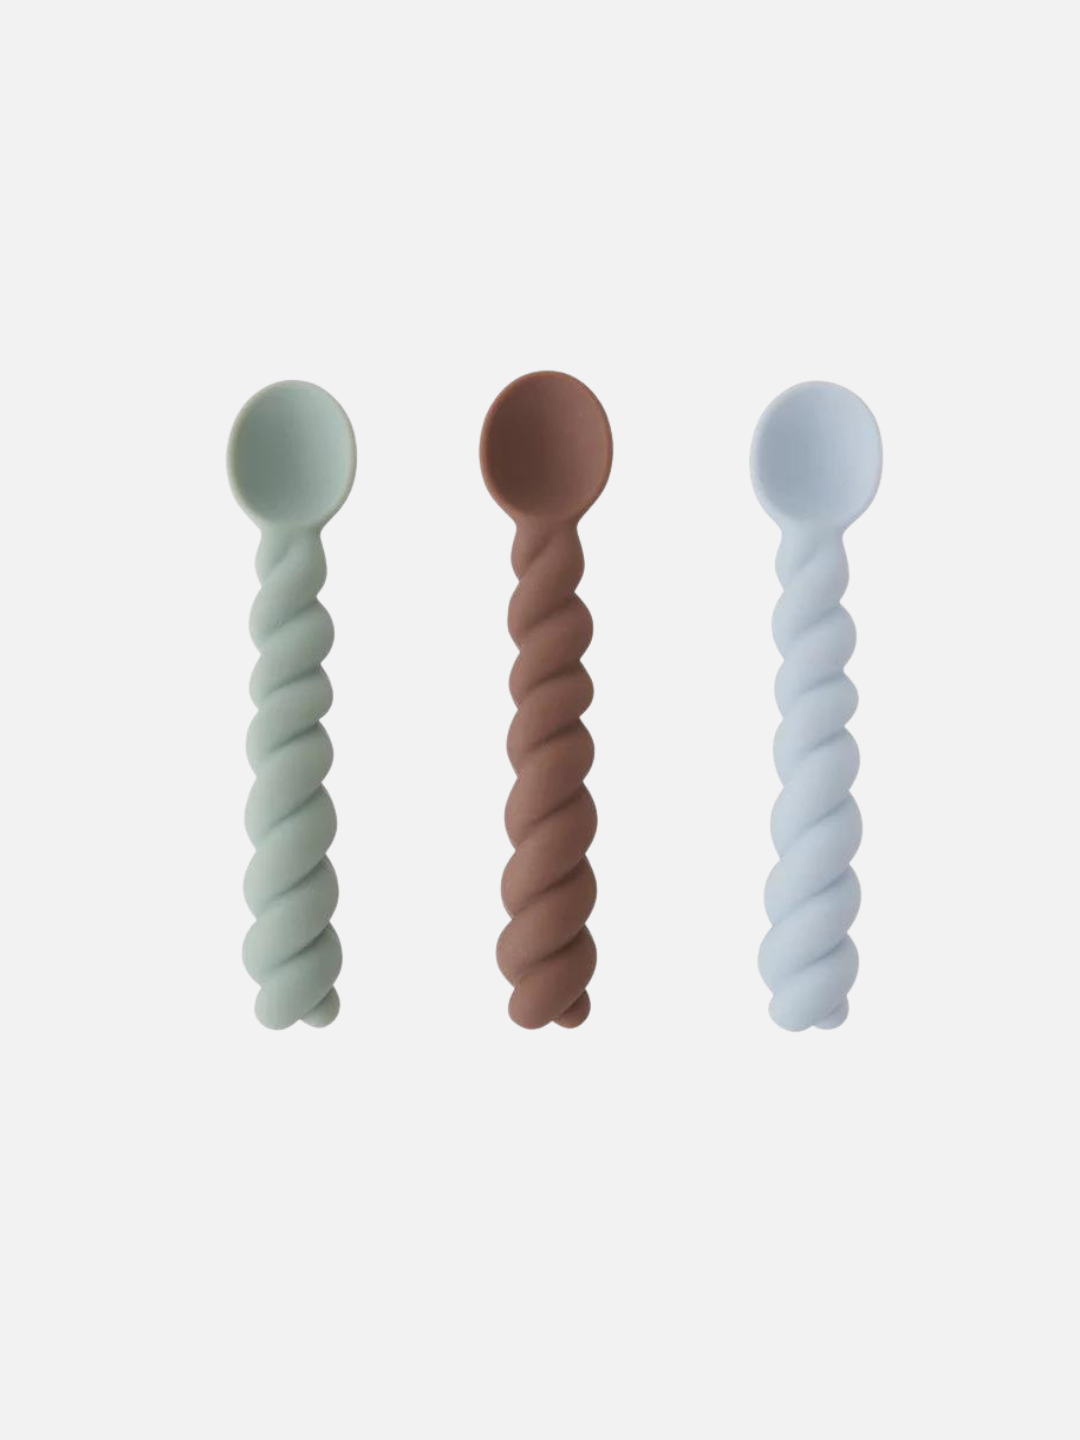 Three rubber kids spoons